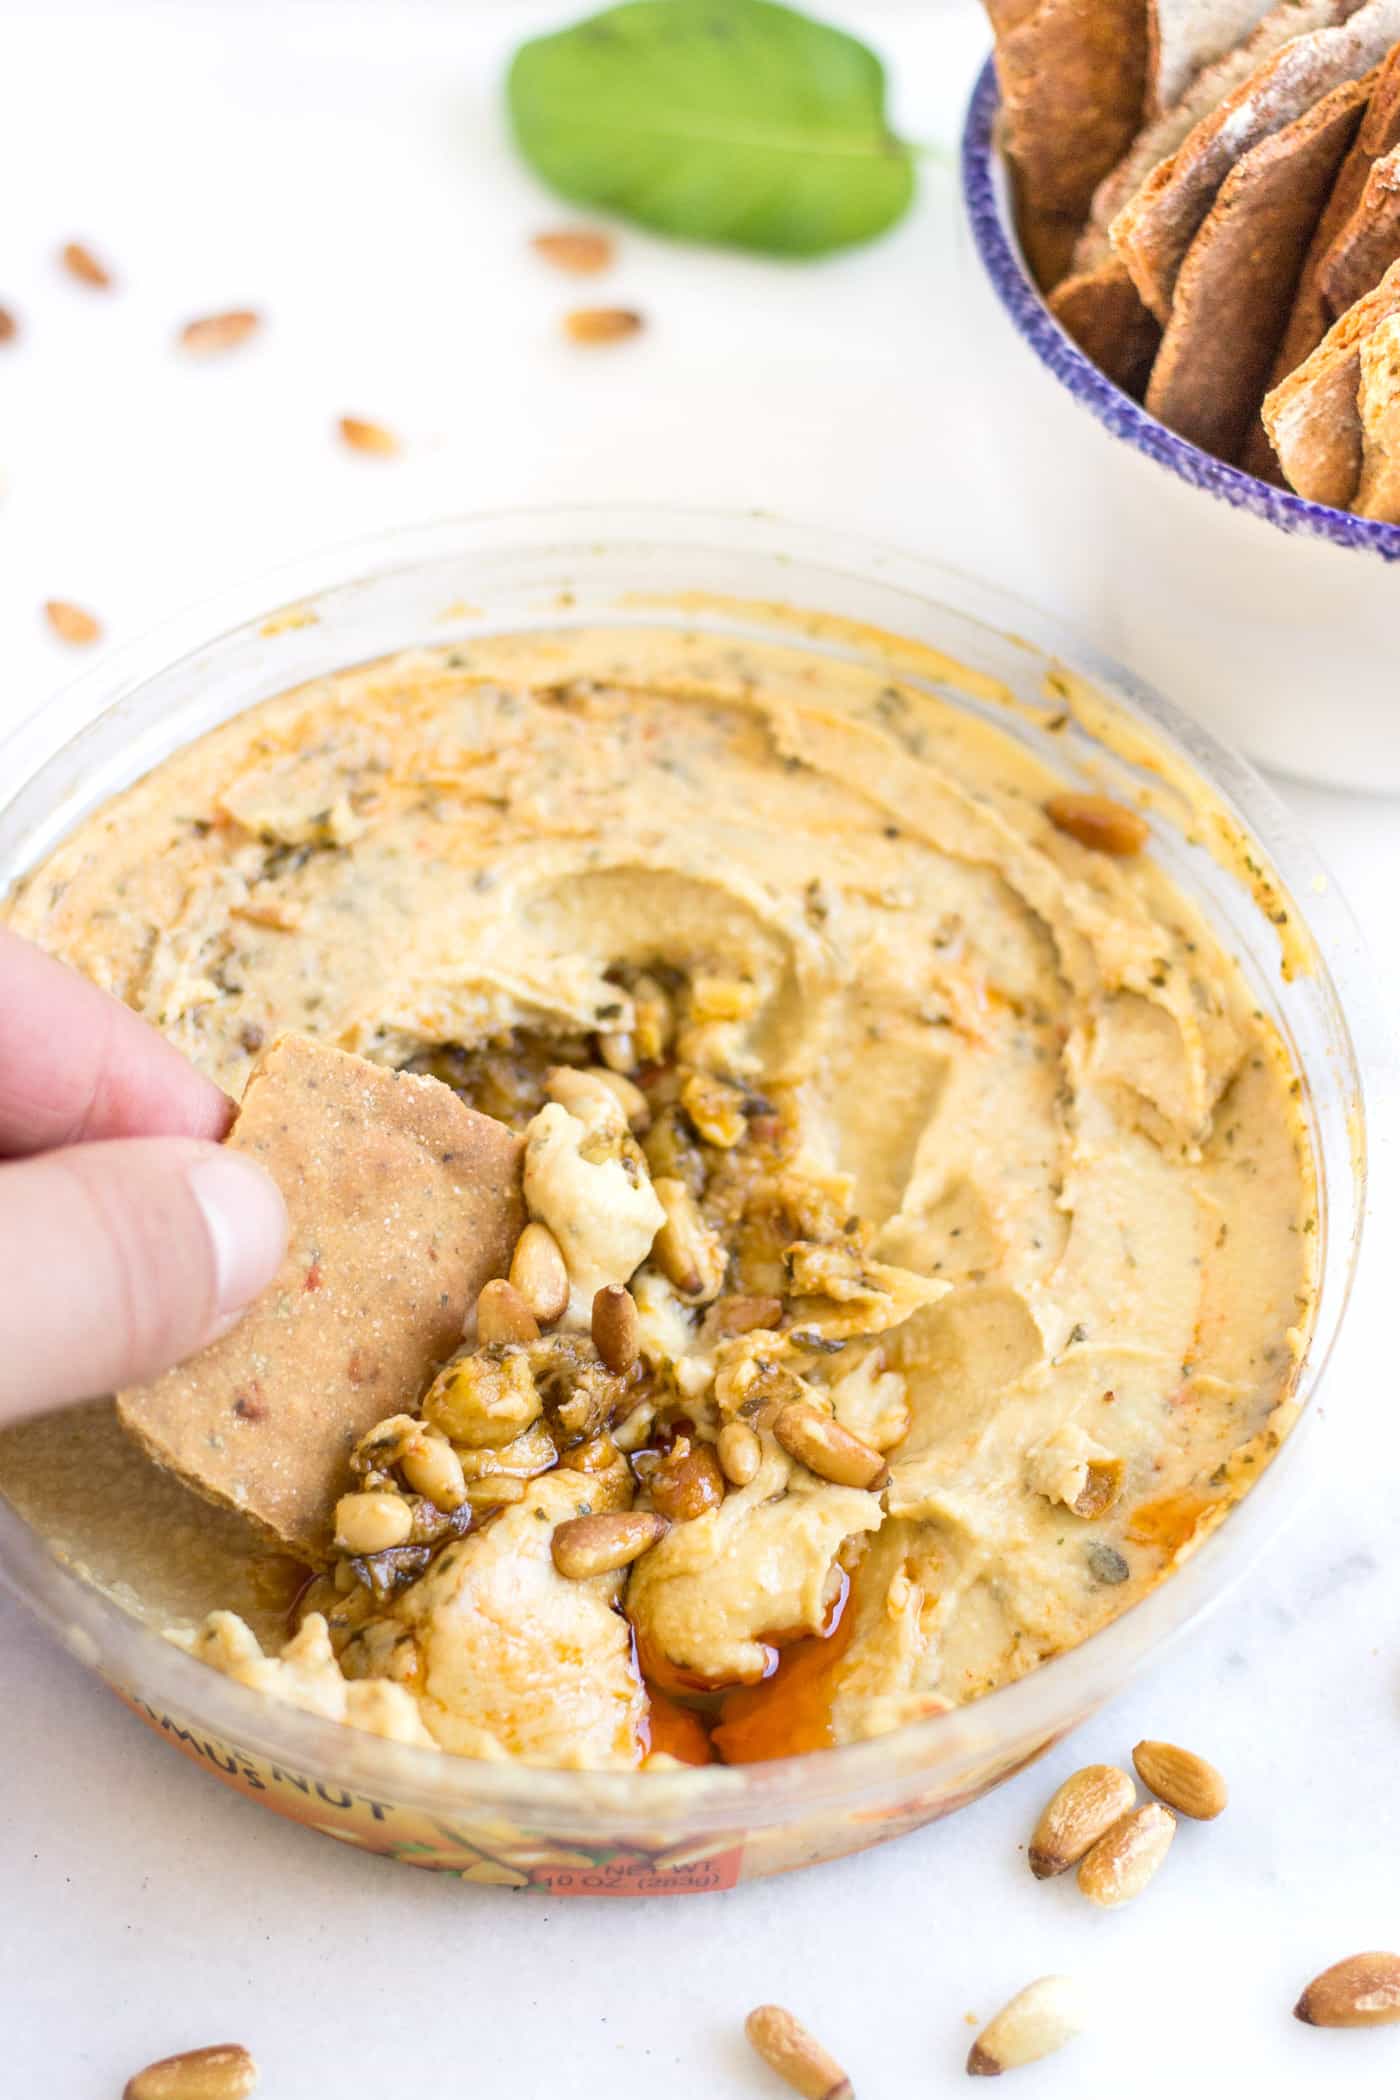 SIMPLE QUINOA CRACKERS dipped in a roasted pine nut hummus...the perfect snack or appetizer!